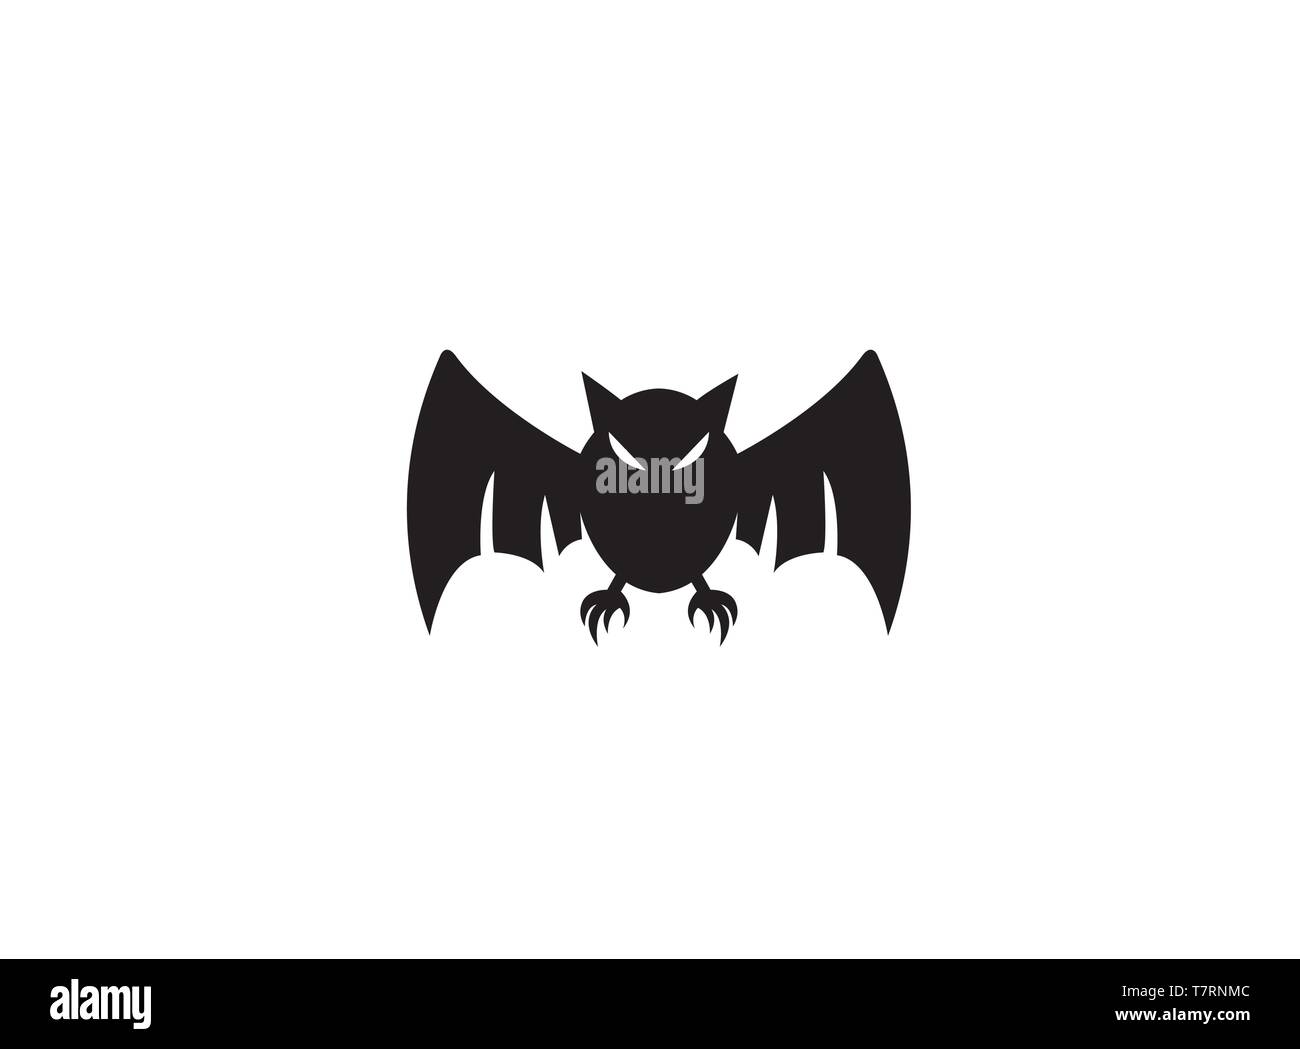 Black bat with angry face and open wings for logo Stock Vector